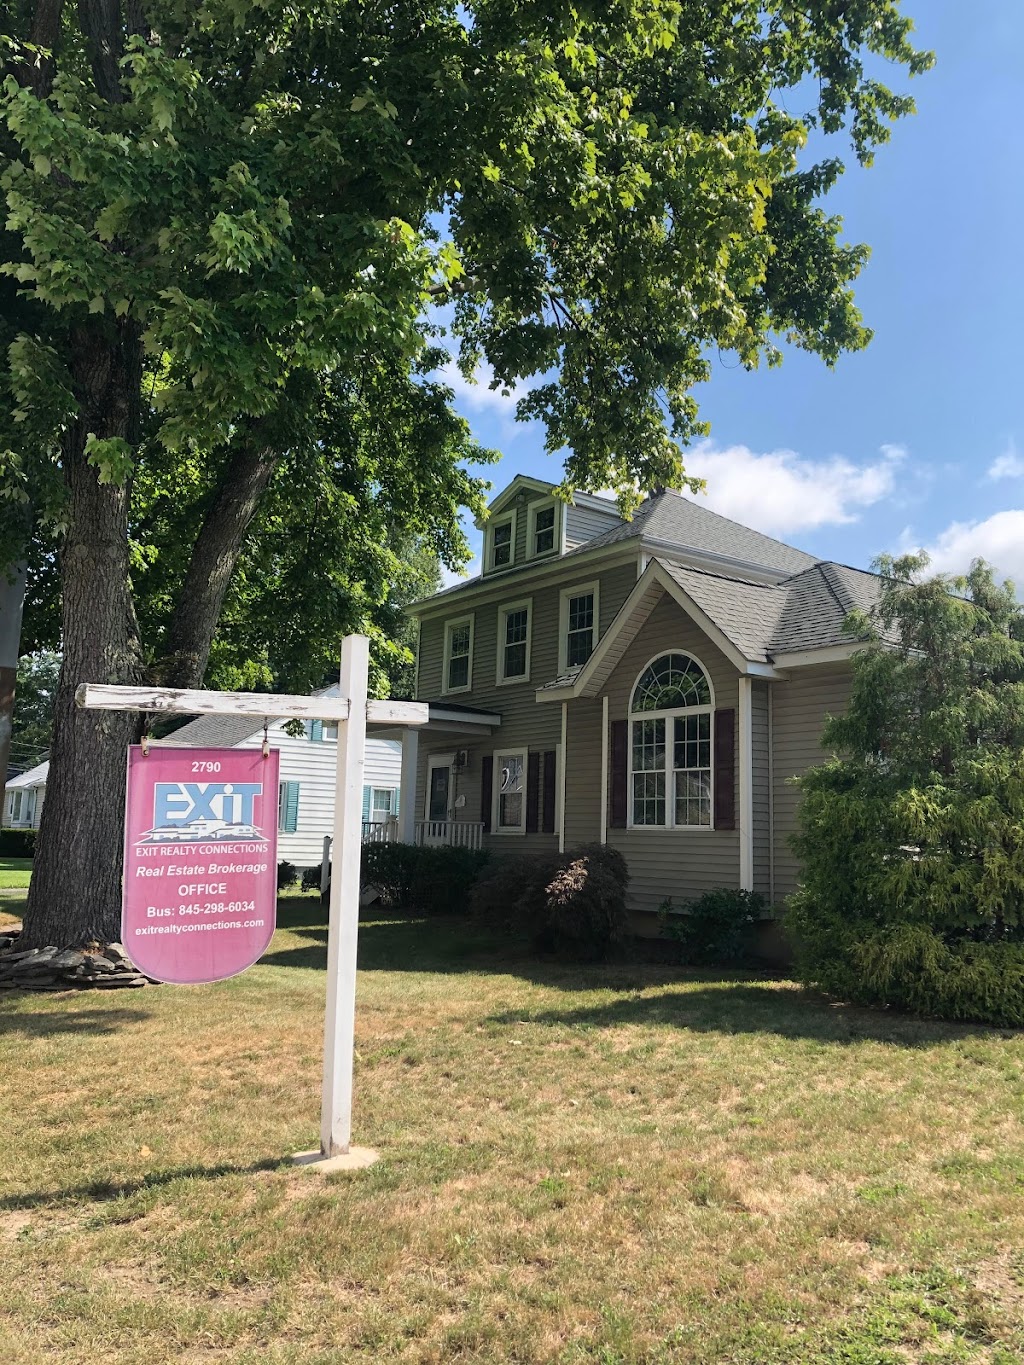 Exit Realty Connections | 2790 W Main St, Wappingers Falls, NY 12590 | Phone: (845) 298-6034